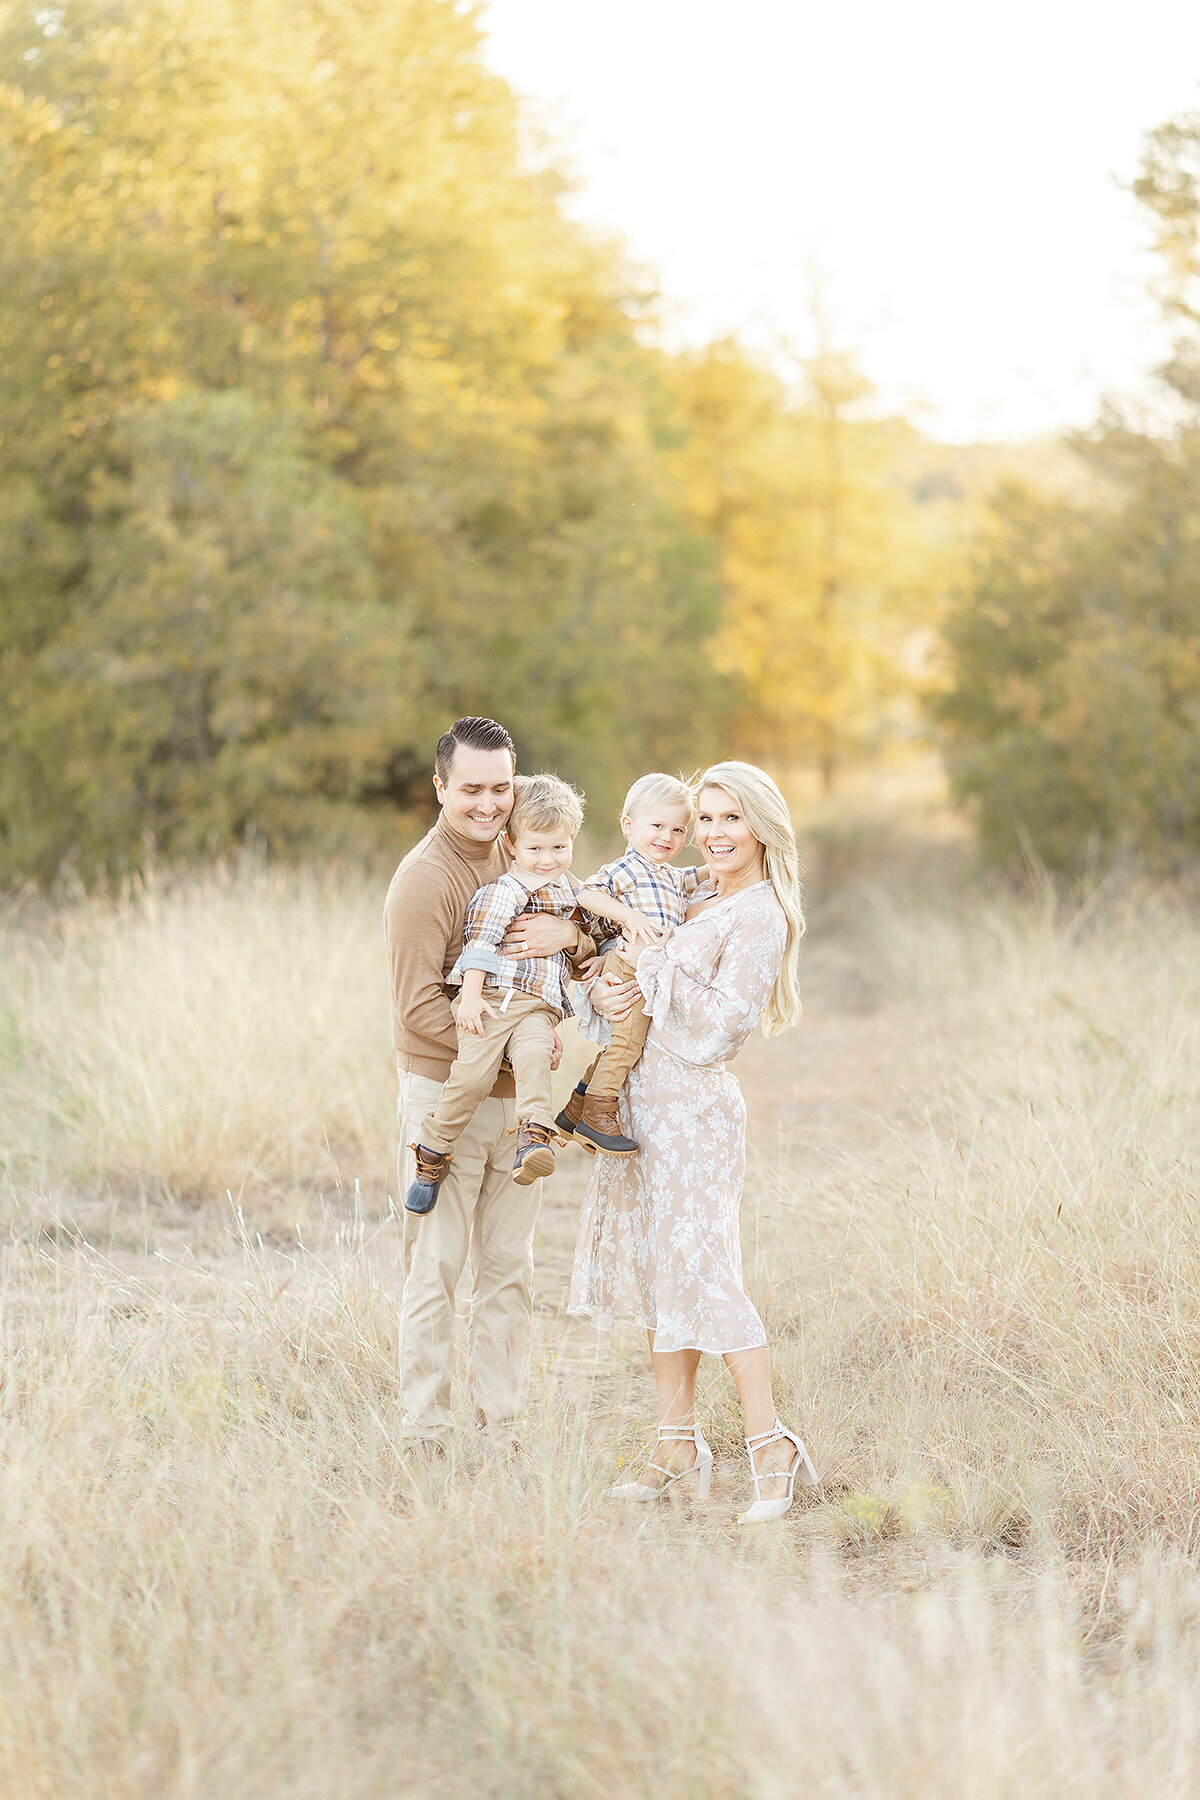 A beautiful DFW family standing by a grassy path posing for their family pictures.